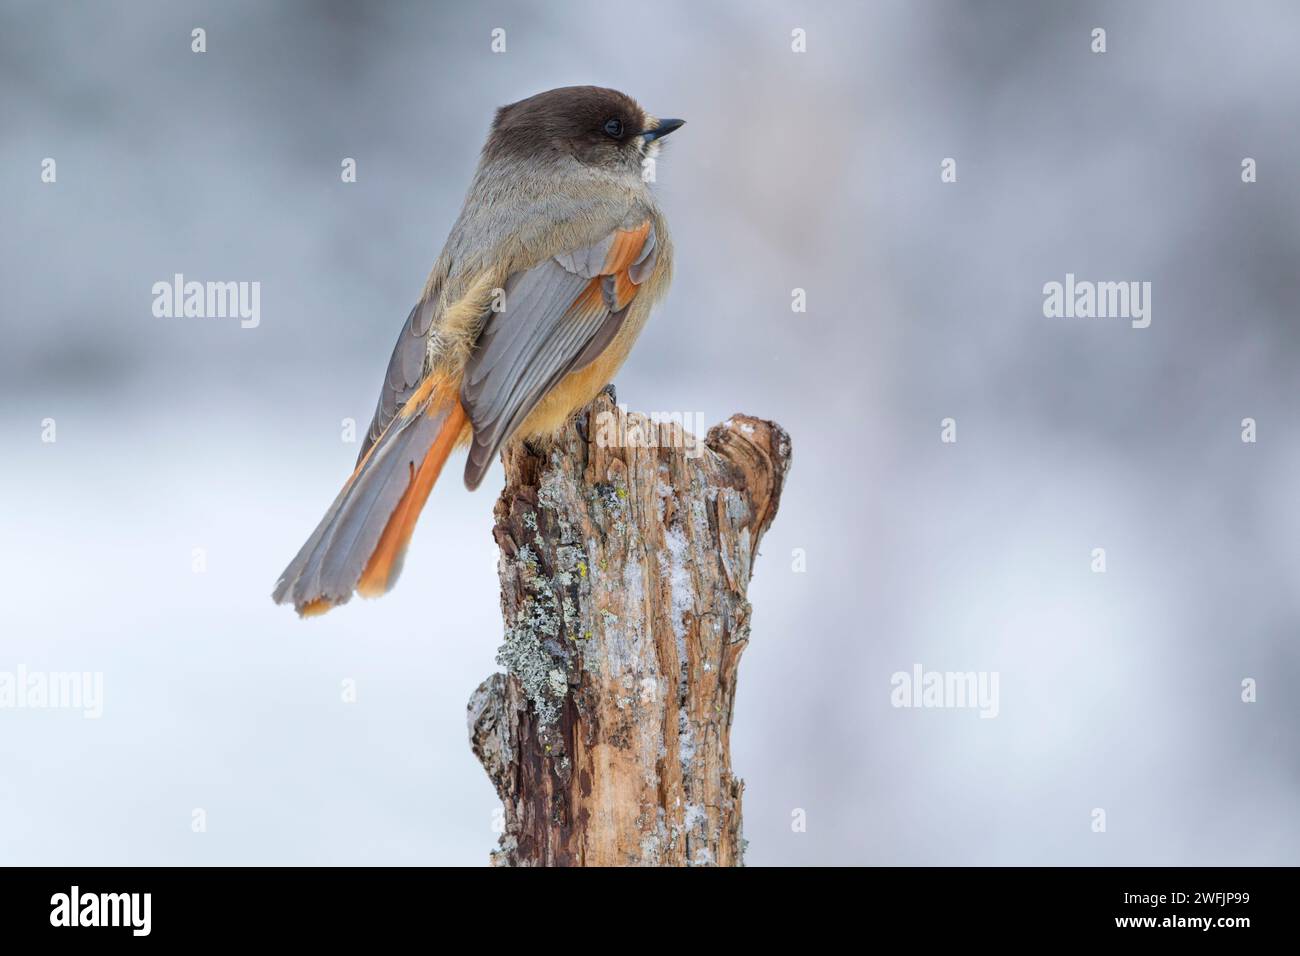 Siberian Jay (Perisoreus infaustus), perched on a tree stump. Showing details of plumage  Set against a pale background. Boreal forest in Finland duri Stock Photo